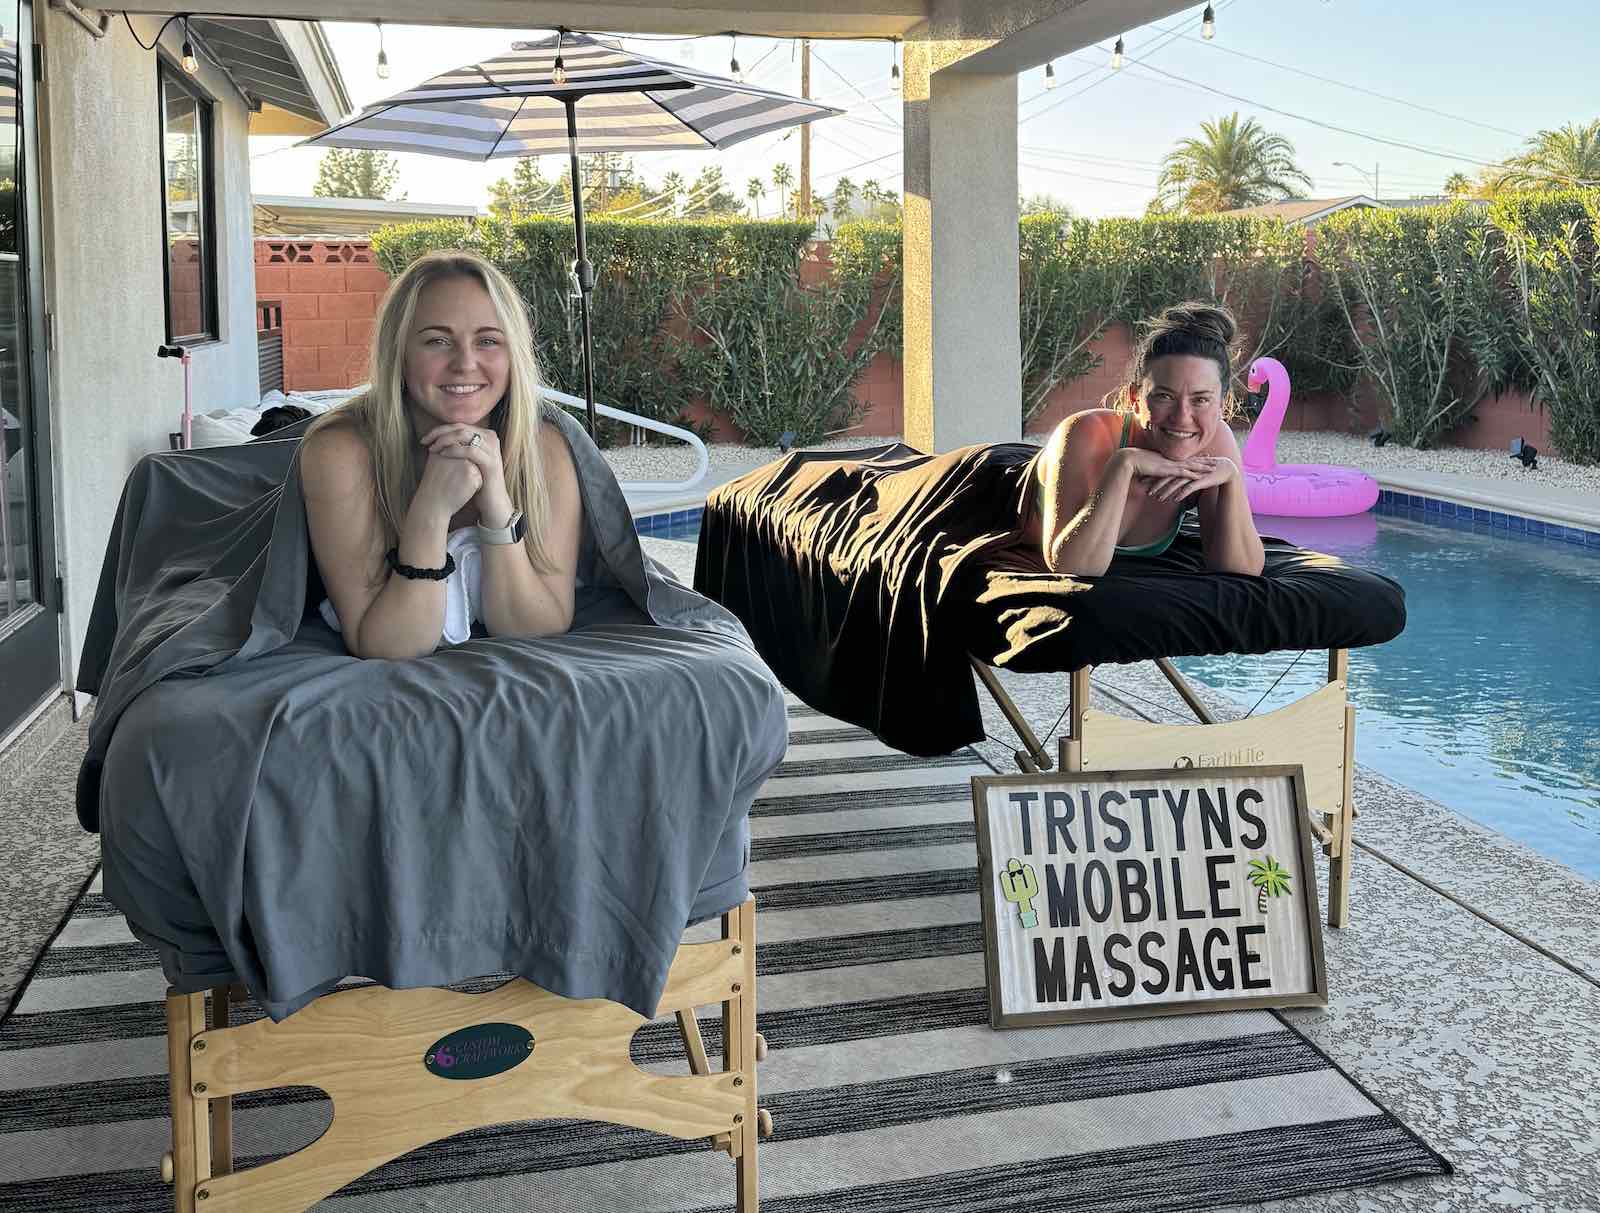 Scottsdale Bachelorette Party Ideas - Massages with Trystan's Mobile Massages